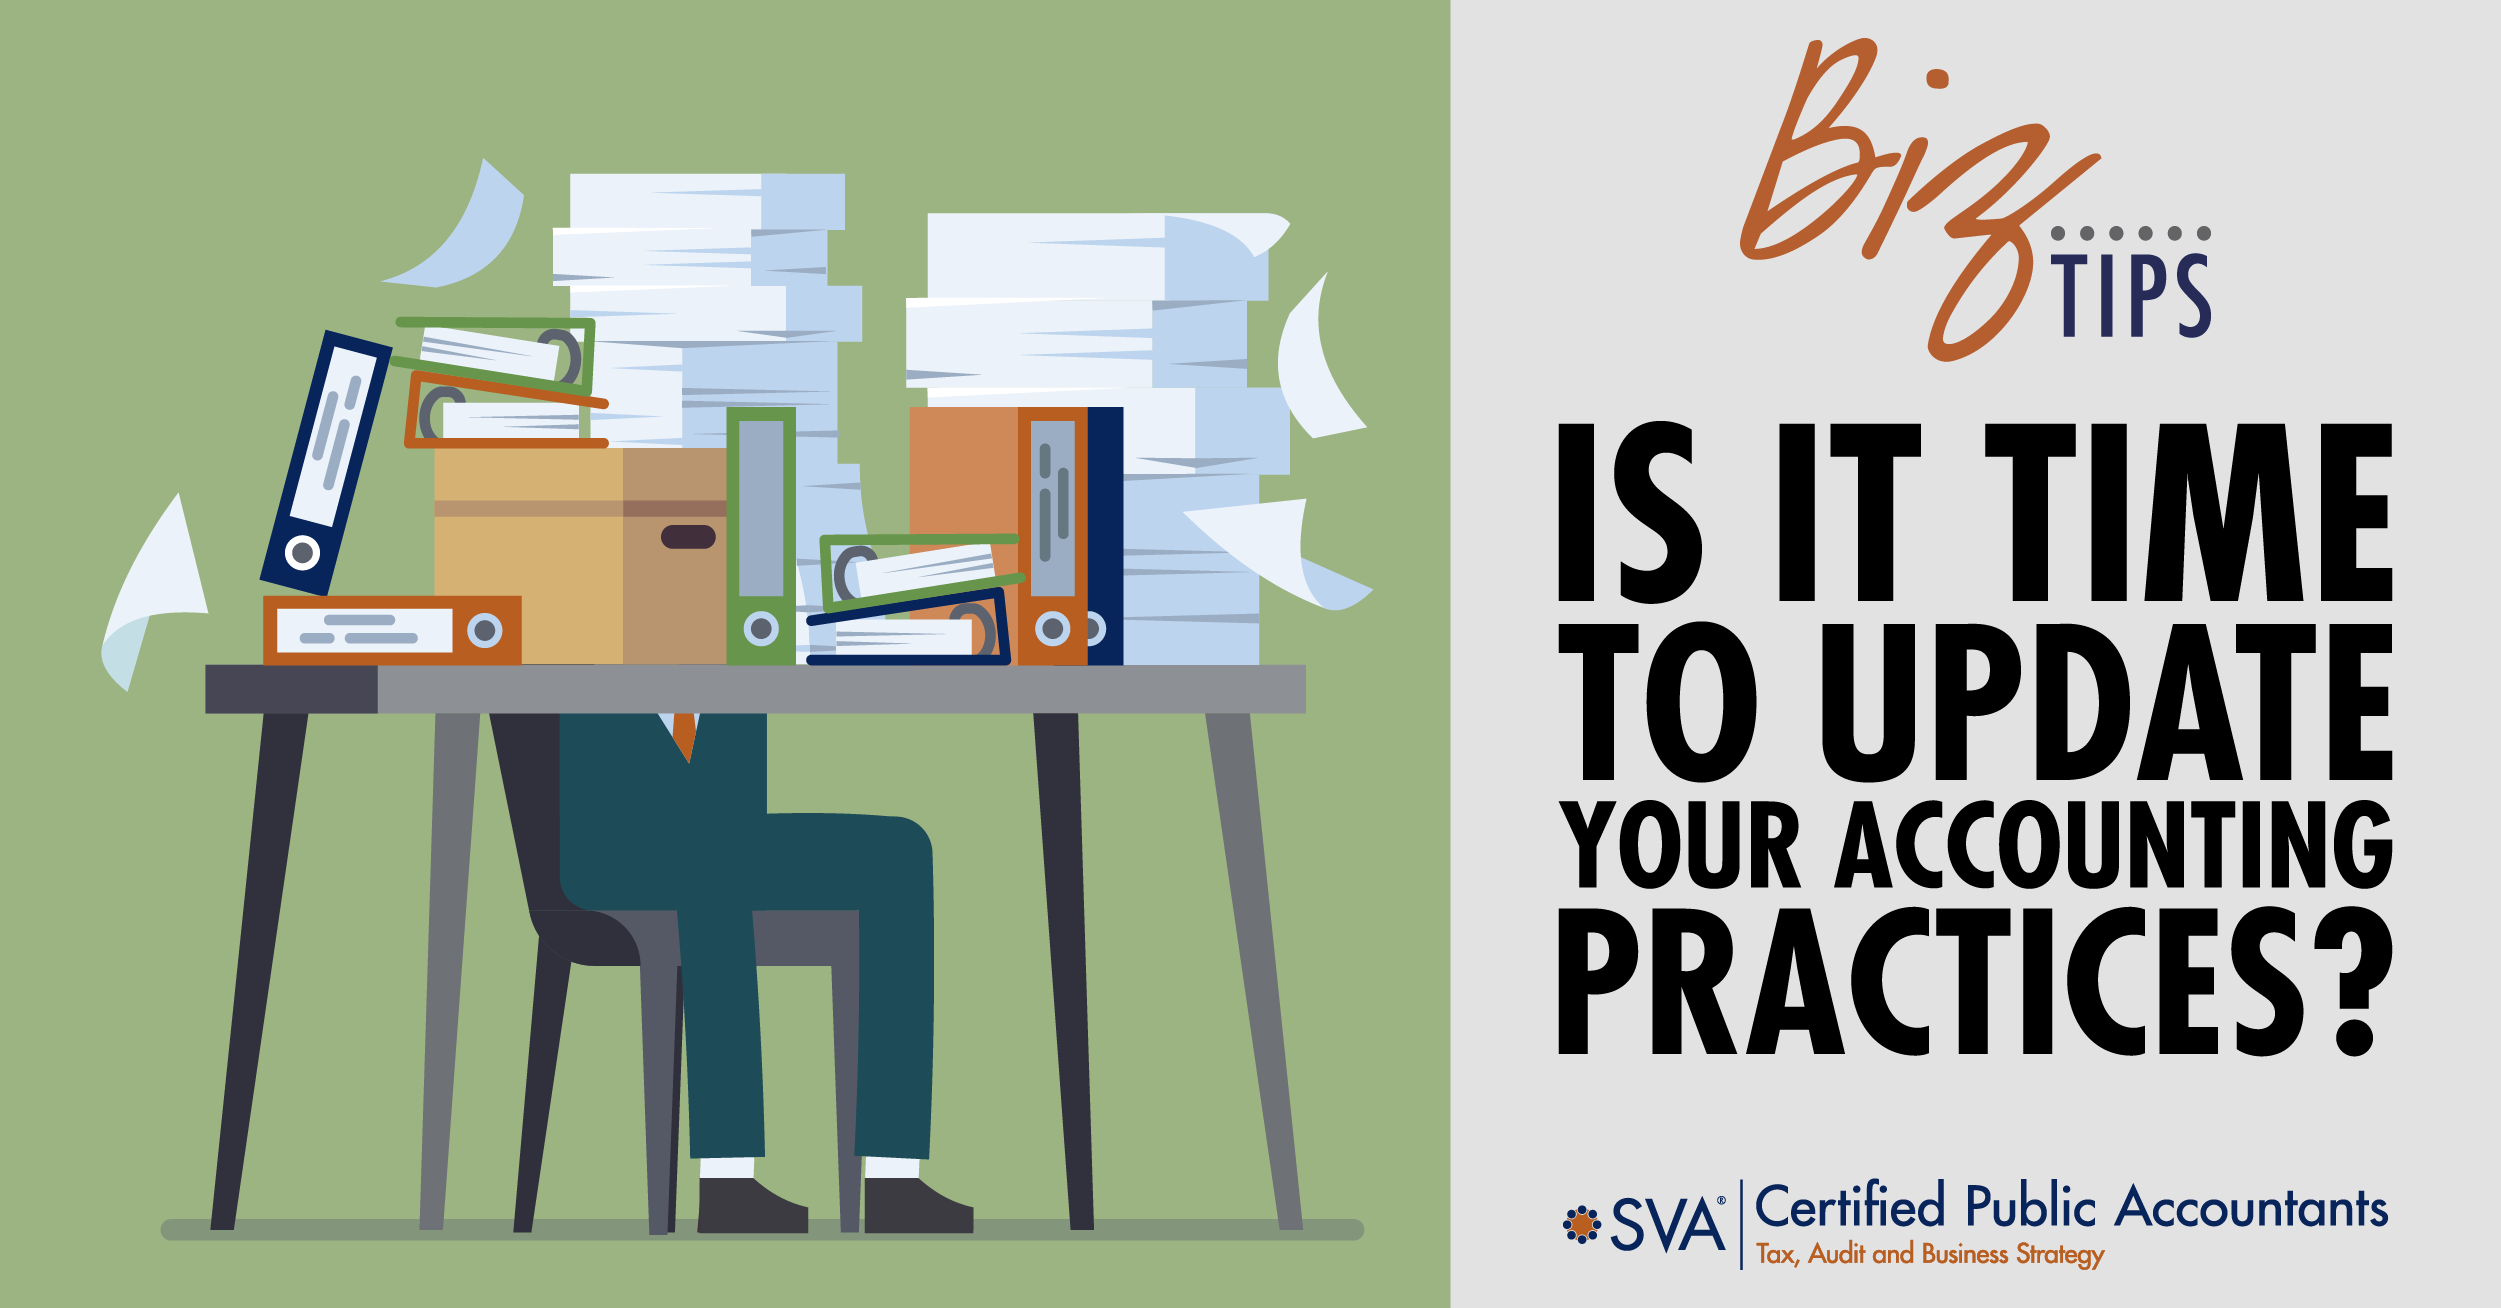 sva-certified-public-accountants-biz-tips-is-it-time-to-update-your-accounting-practices-1